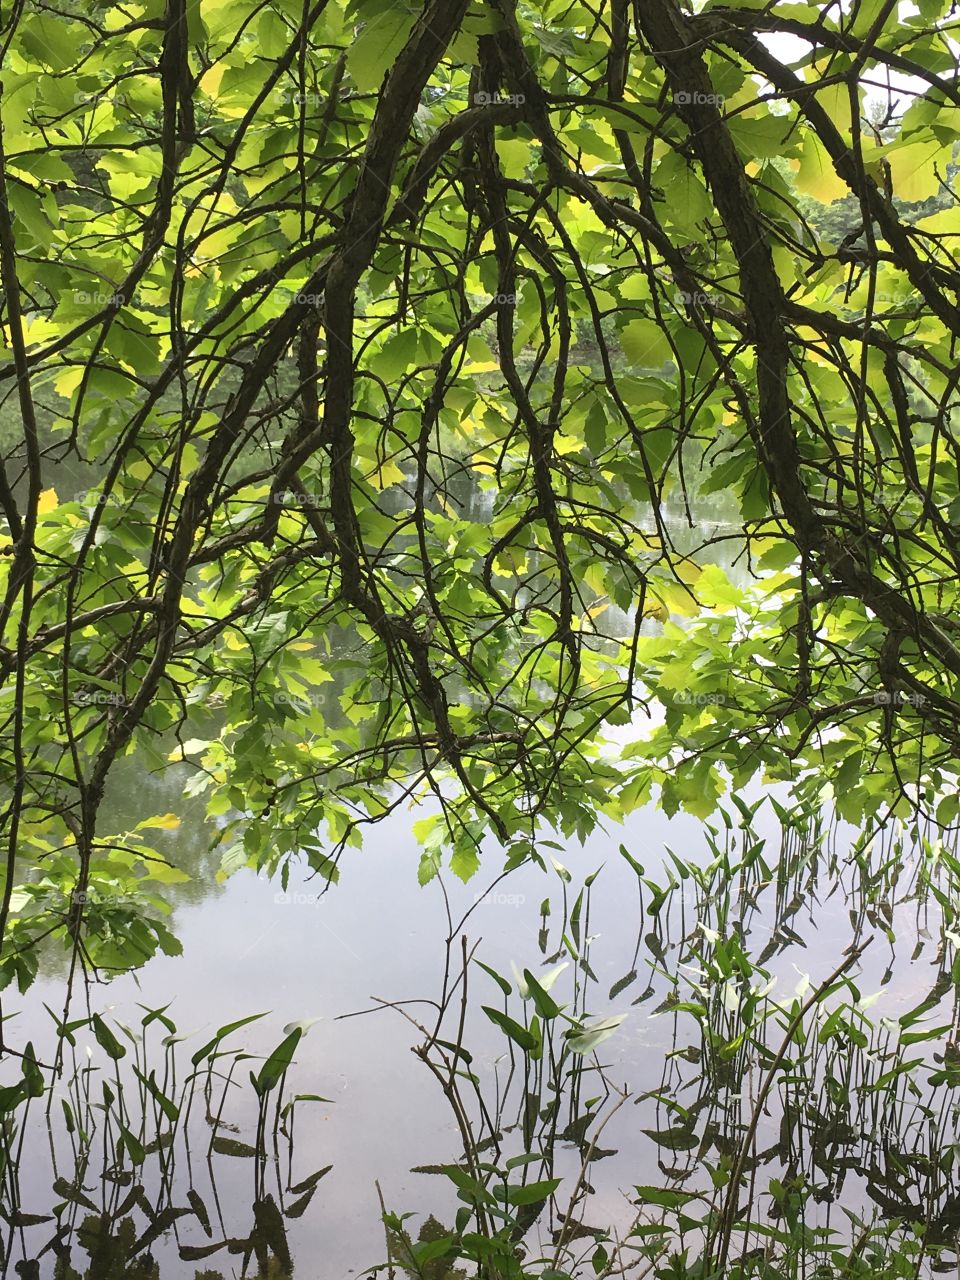  Branches overhanging pond